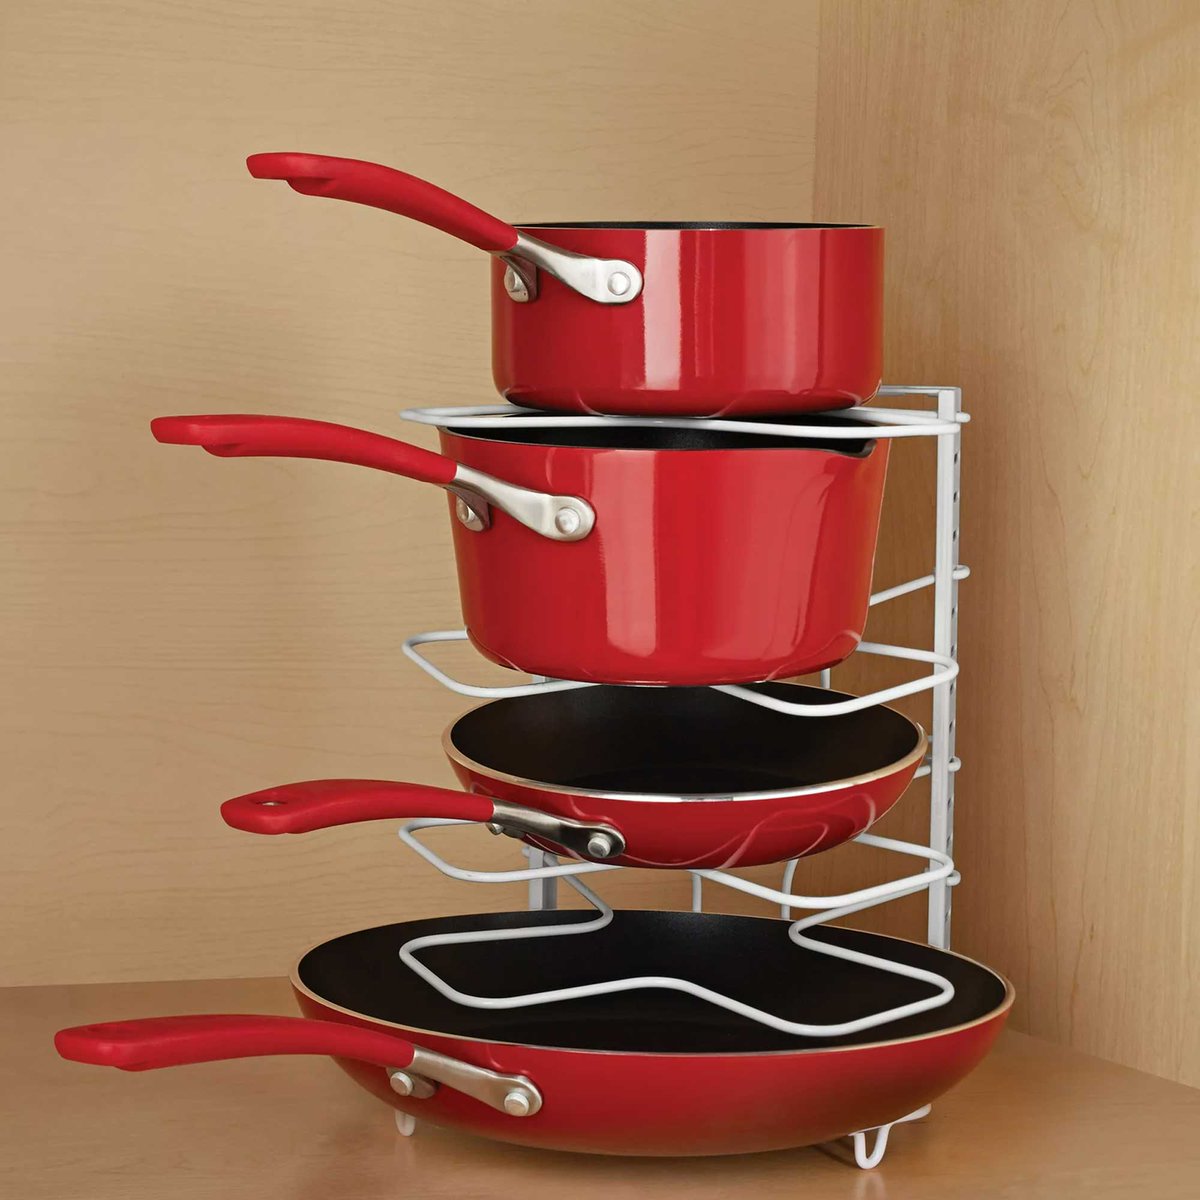 Upgrade your kitchen game with this 5-Tier Pan Organizer! 🍳🥘 Adjustable dividers, rust-resistant finish, and space-saving design make it a must-have for any cabinet or pantry. Say goodbye to clutter and hello to organized bliss! 😍🙌 #KitchenGoals #PanOrganizer